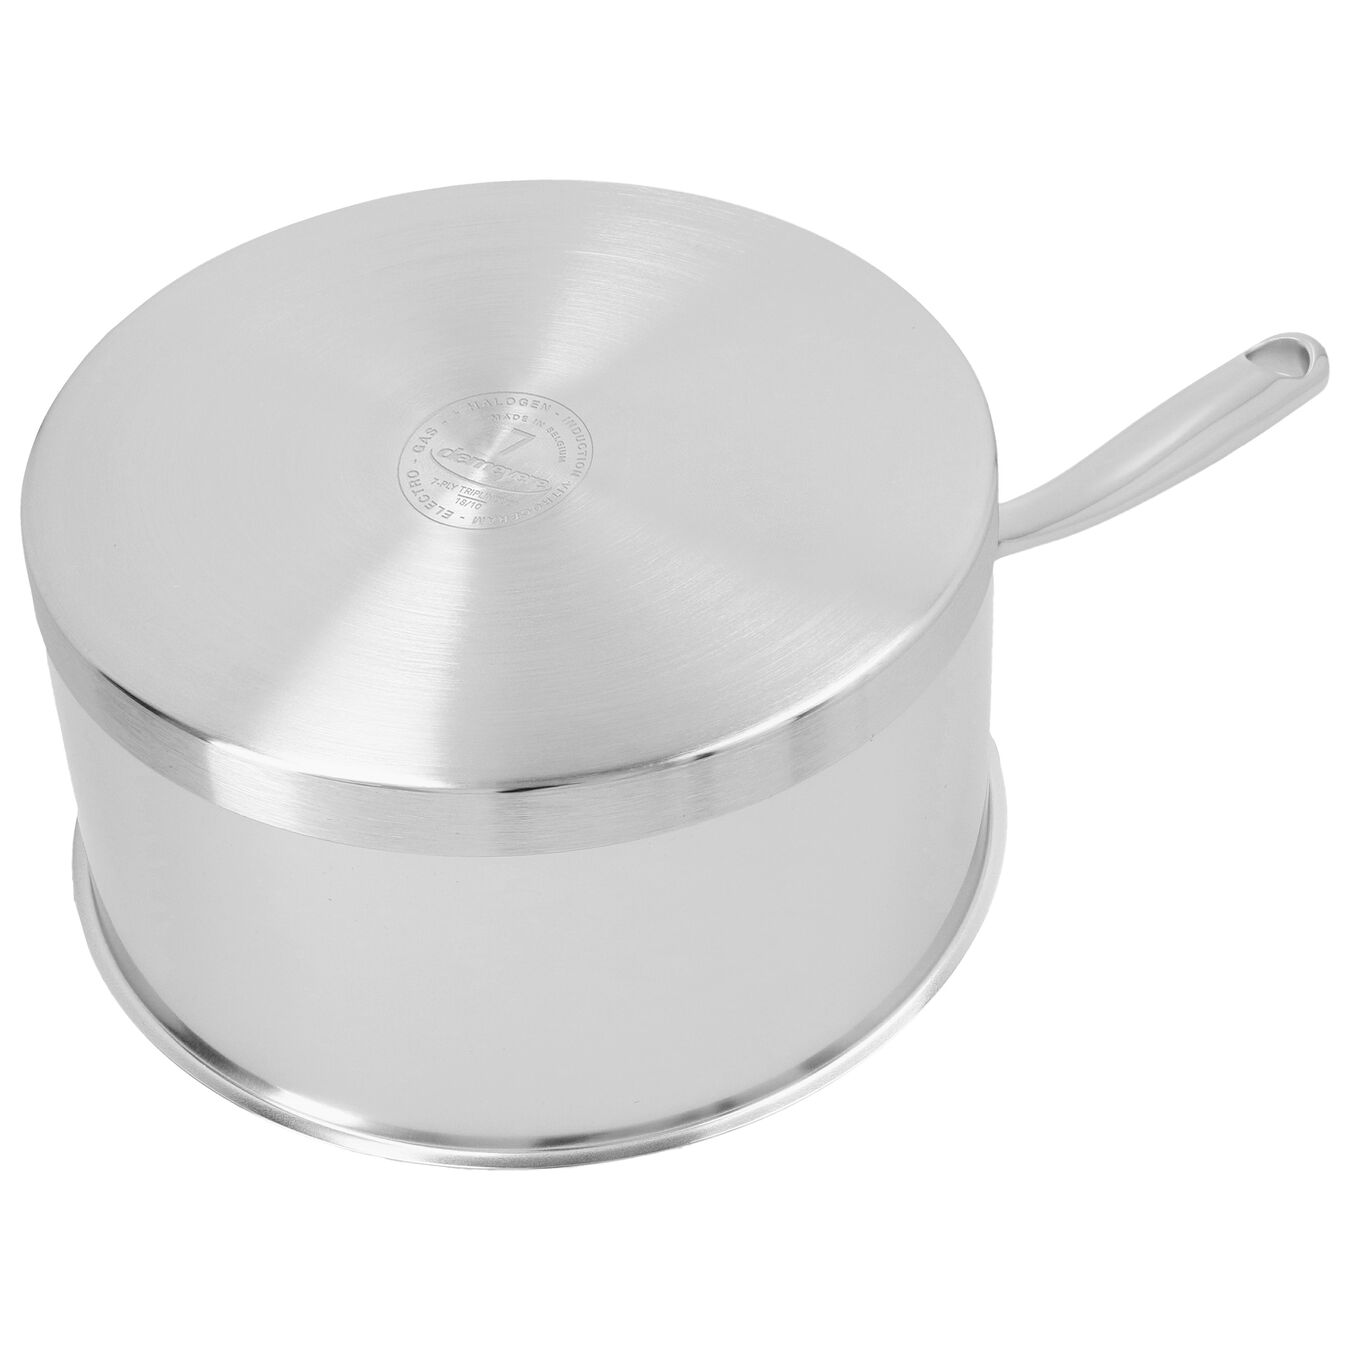 Demeyere Atlantis 7 Collection 3L 18/10 Stainless Steel Round Sauce Pan with Lid base